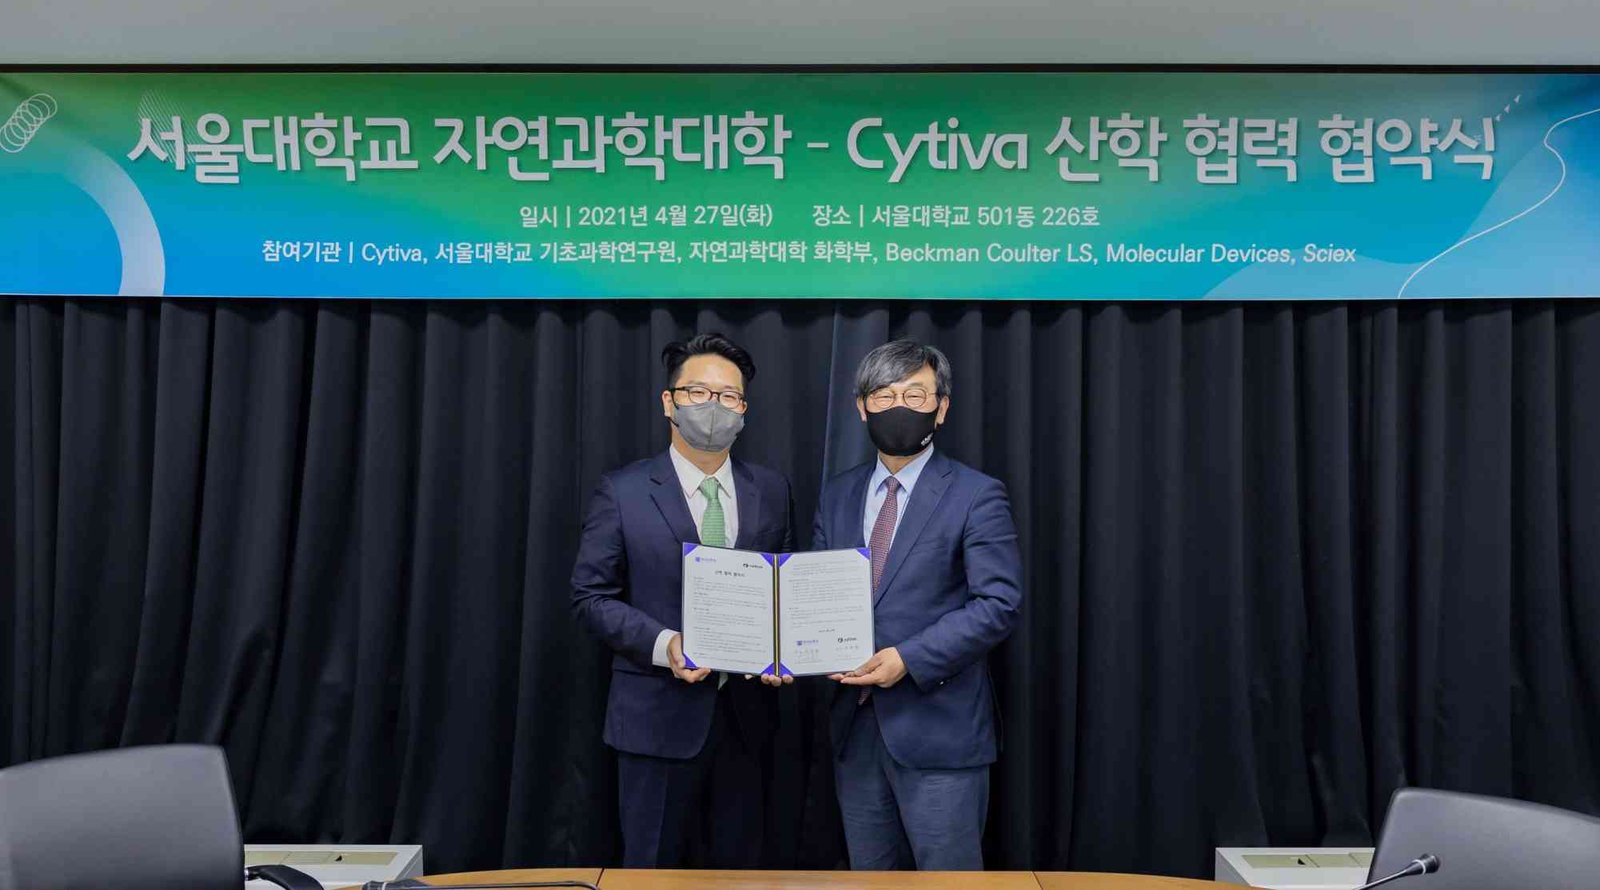 Above: Joon Ho Choi (left), General Manager of Cytiva Korea and Junho Lee (right), Dean of Cellege of Natural Sciences at SNU